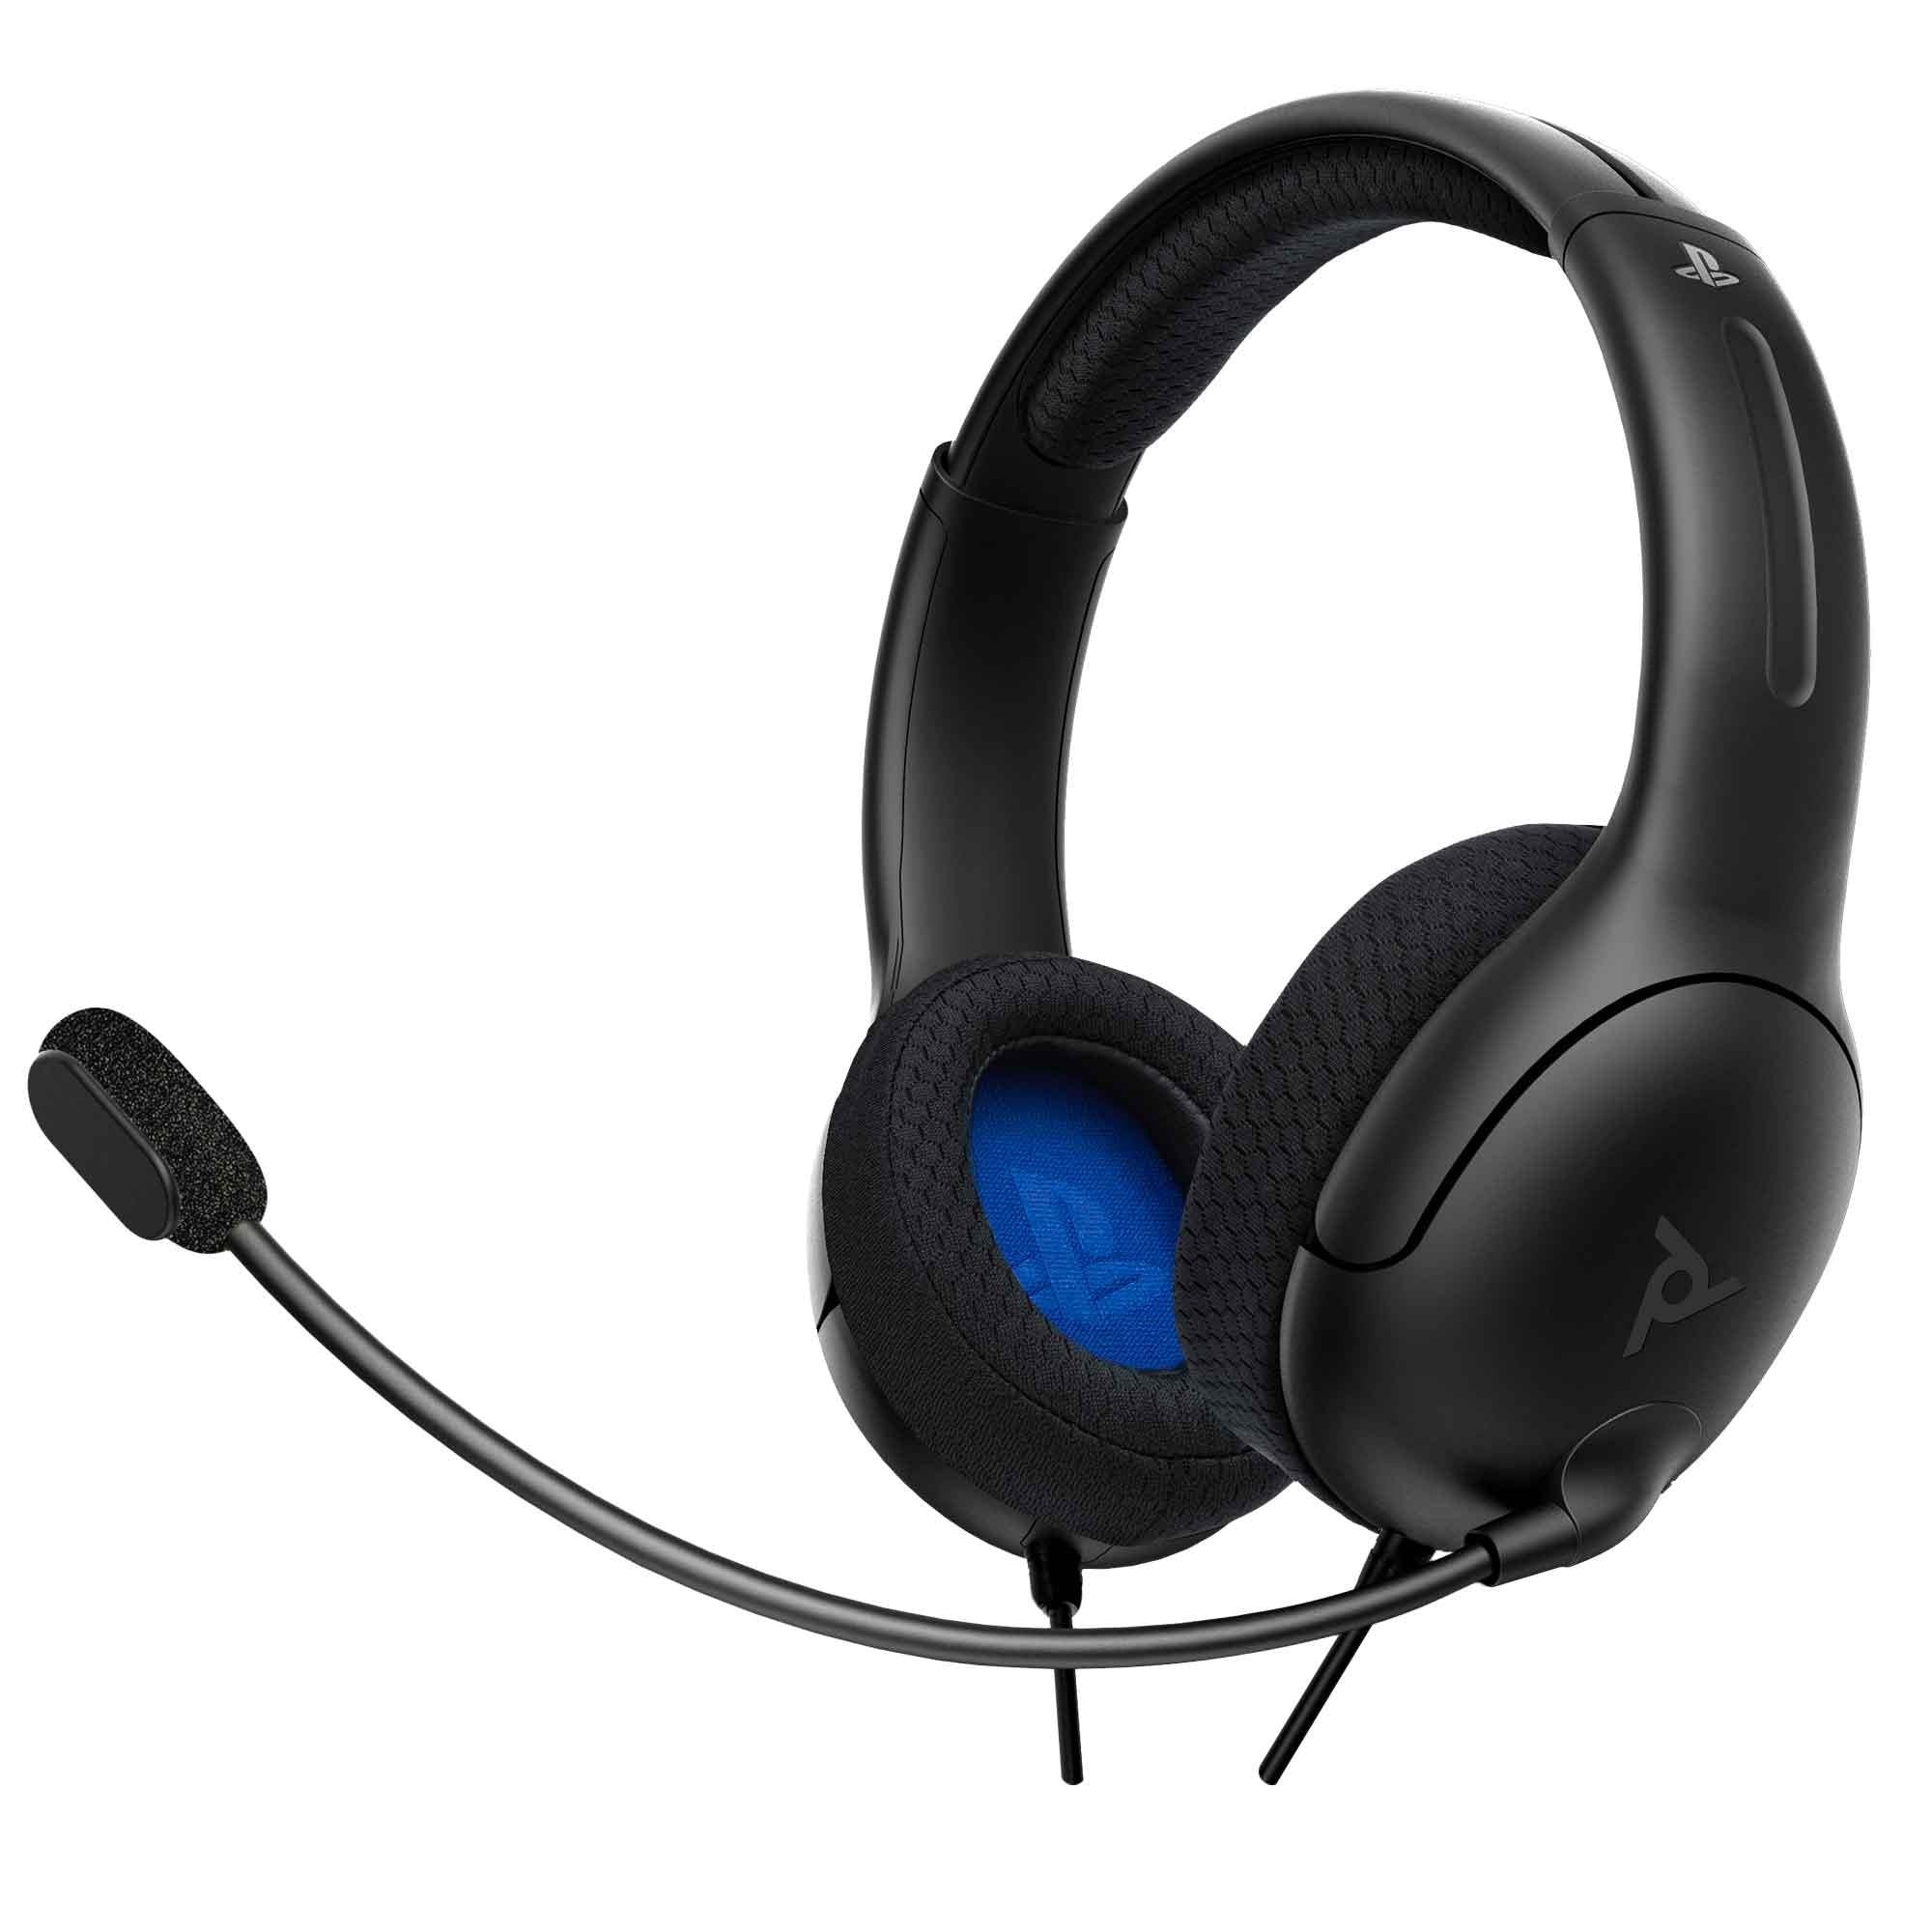 lvl 40 wired gaming headset for playstation